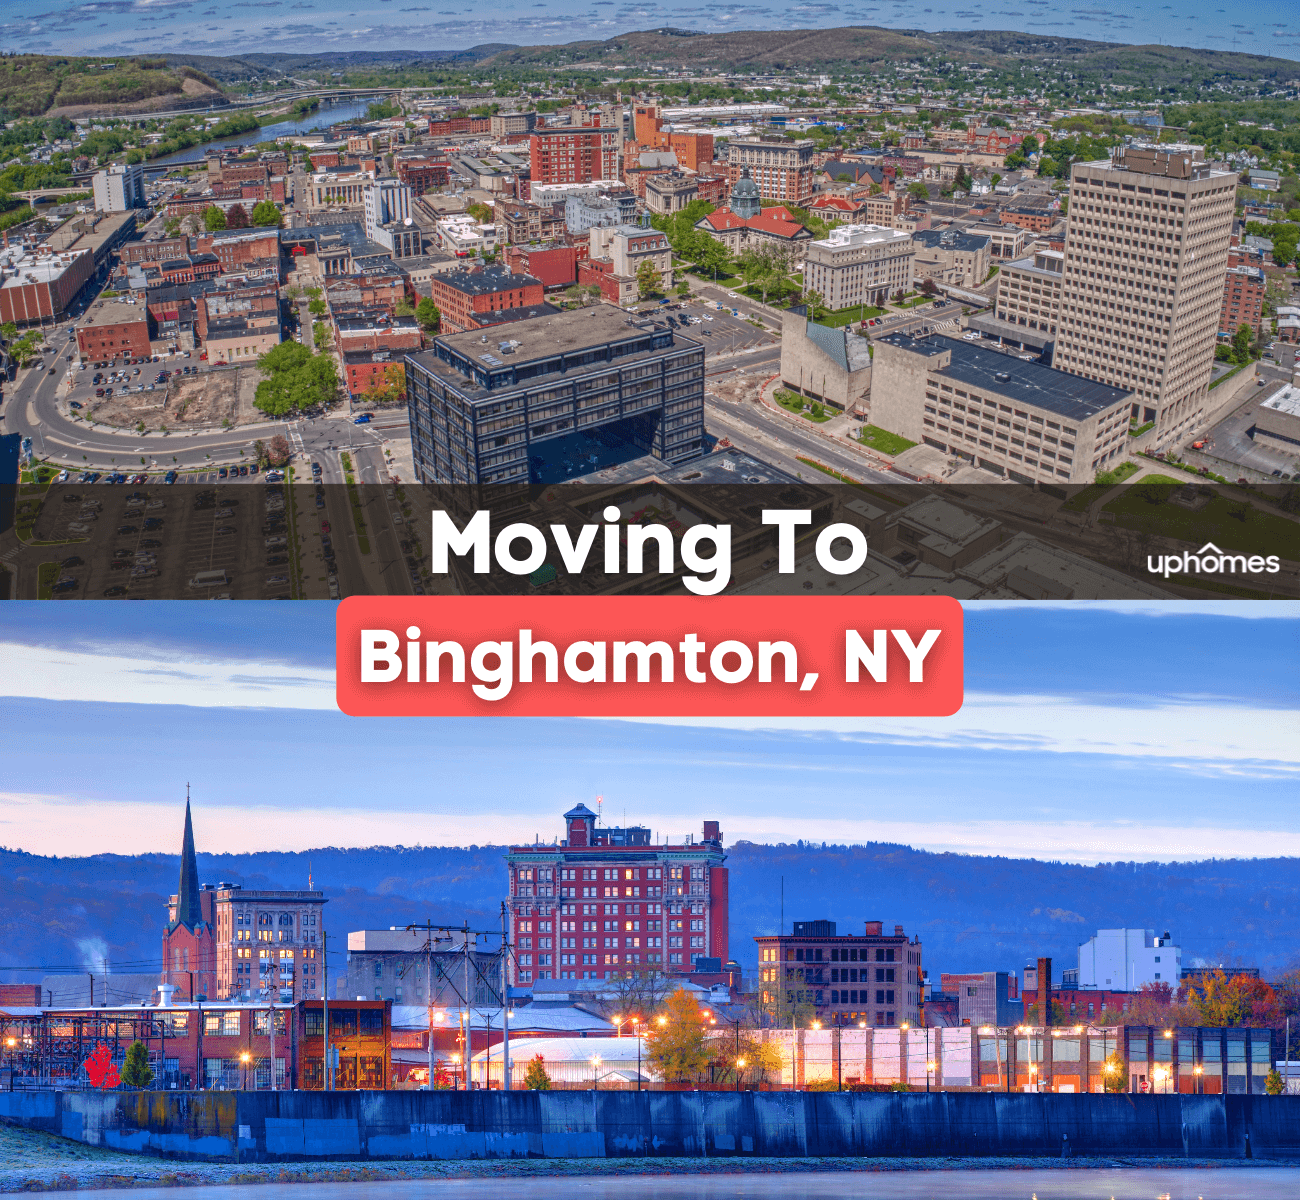 Moving to Binghamton, NY - What is it like living in Binghamton?